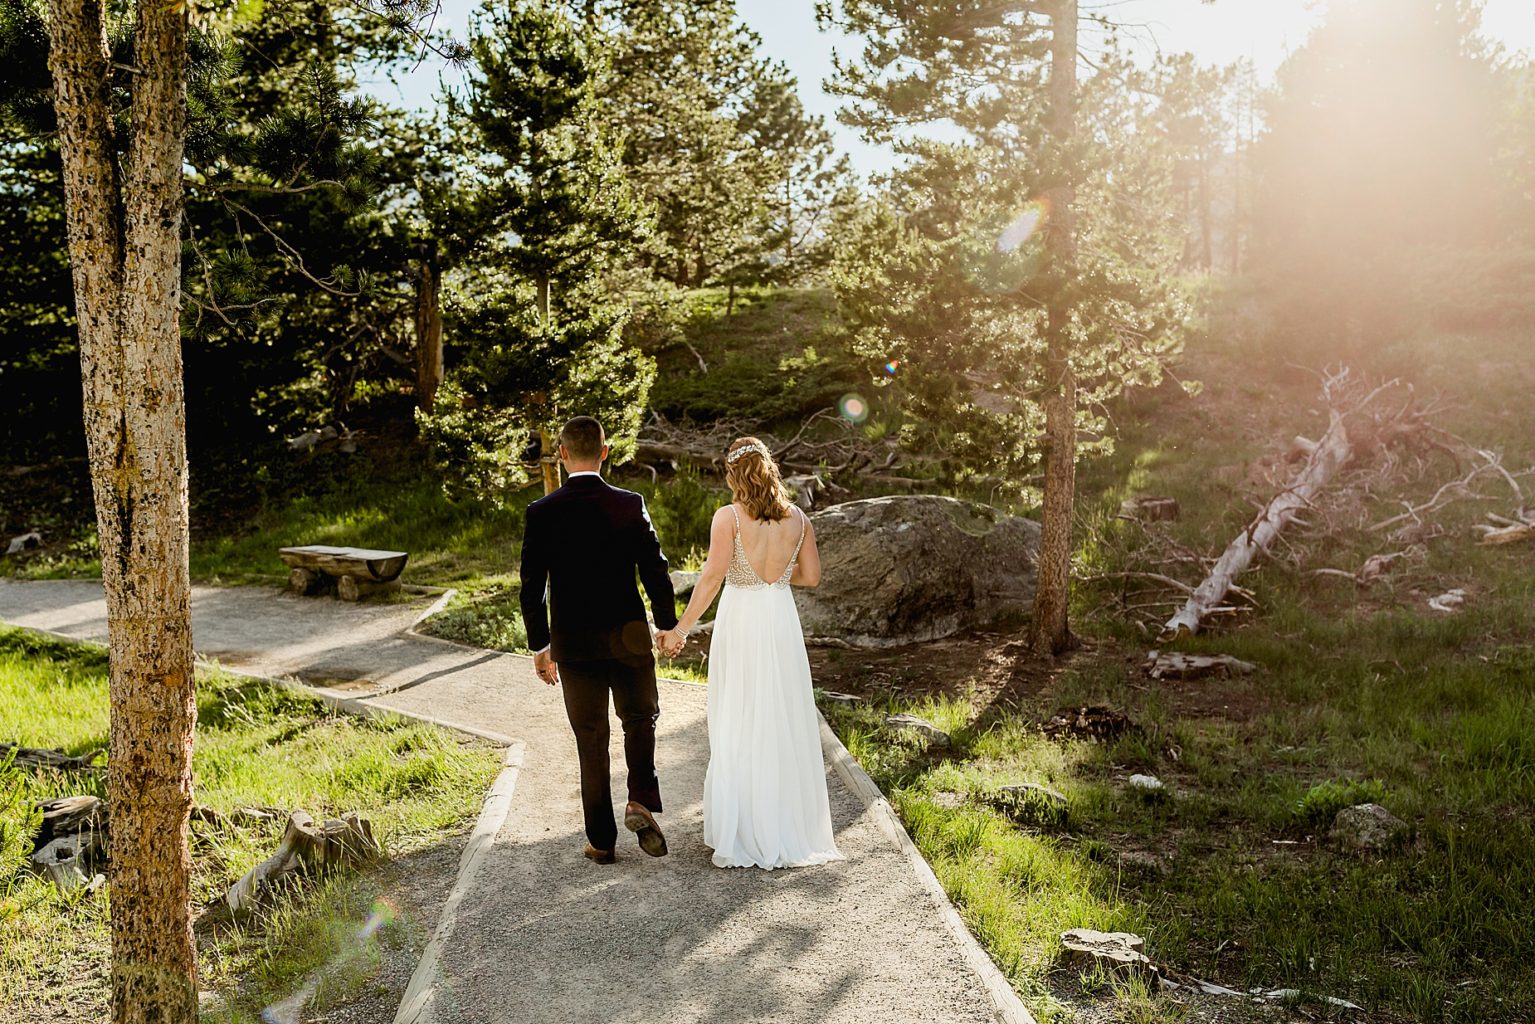 bride and groom walk together after Sprague Lake ceremony in the beautiful trees at sunset